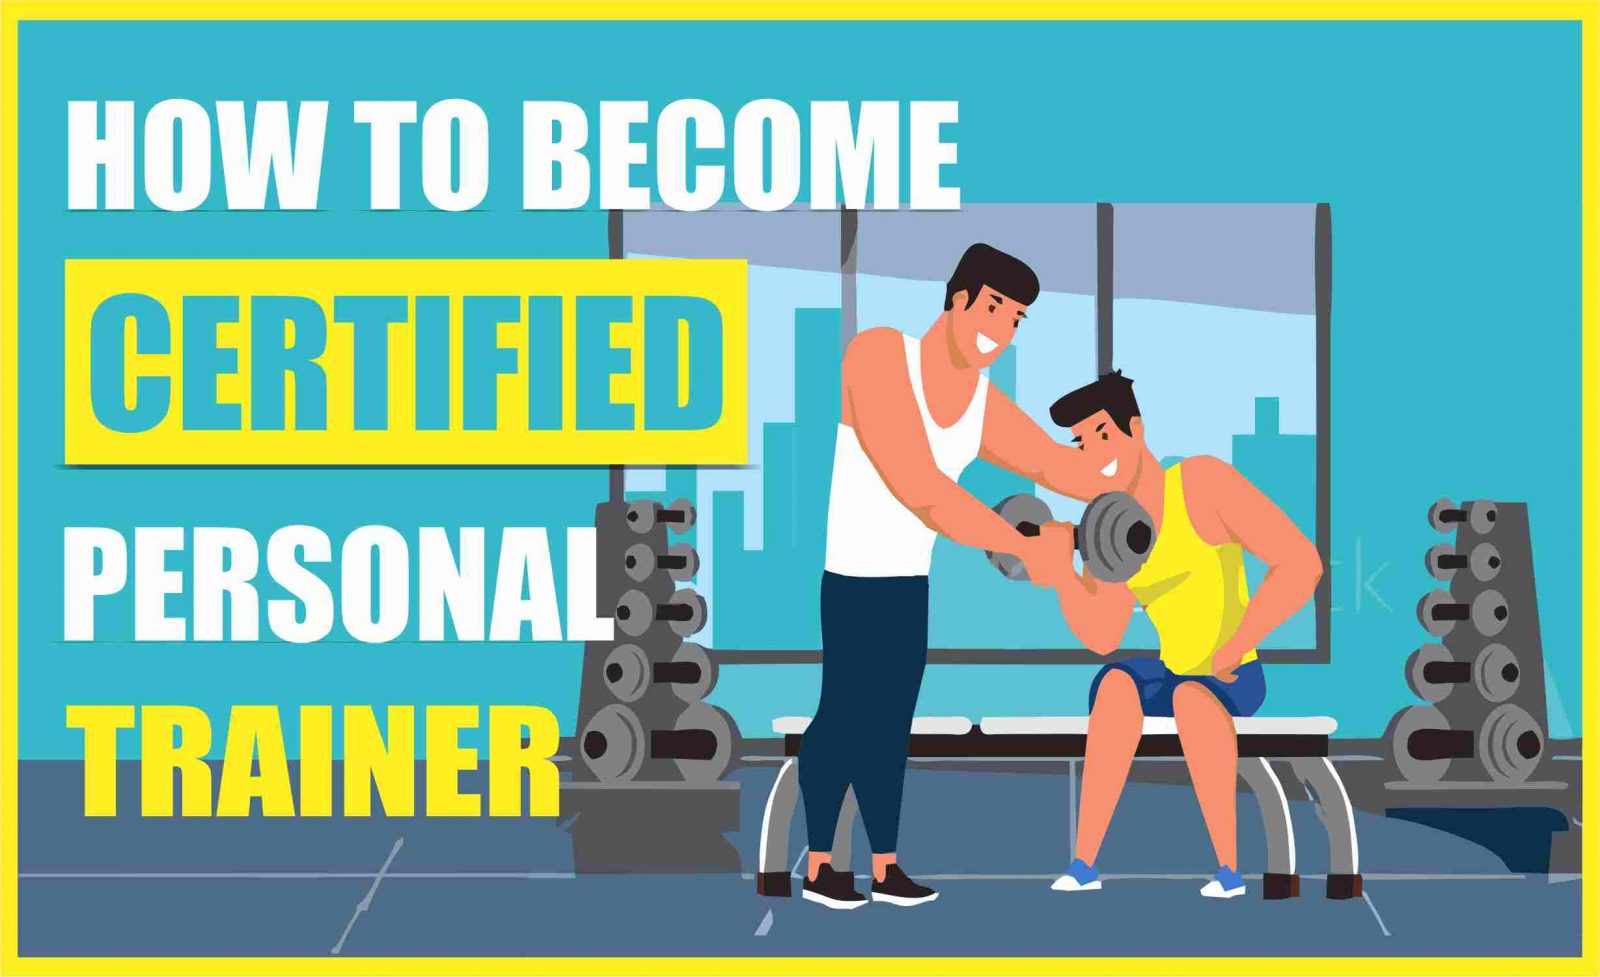 How to become certified personal trainer?